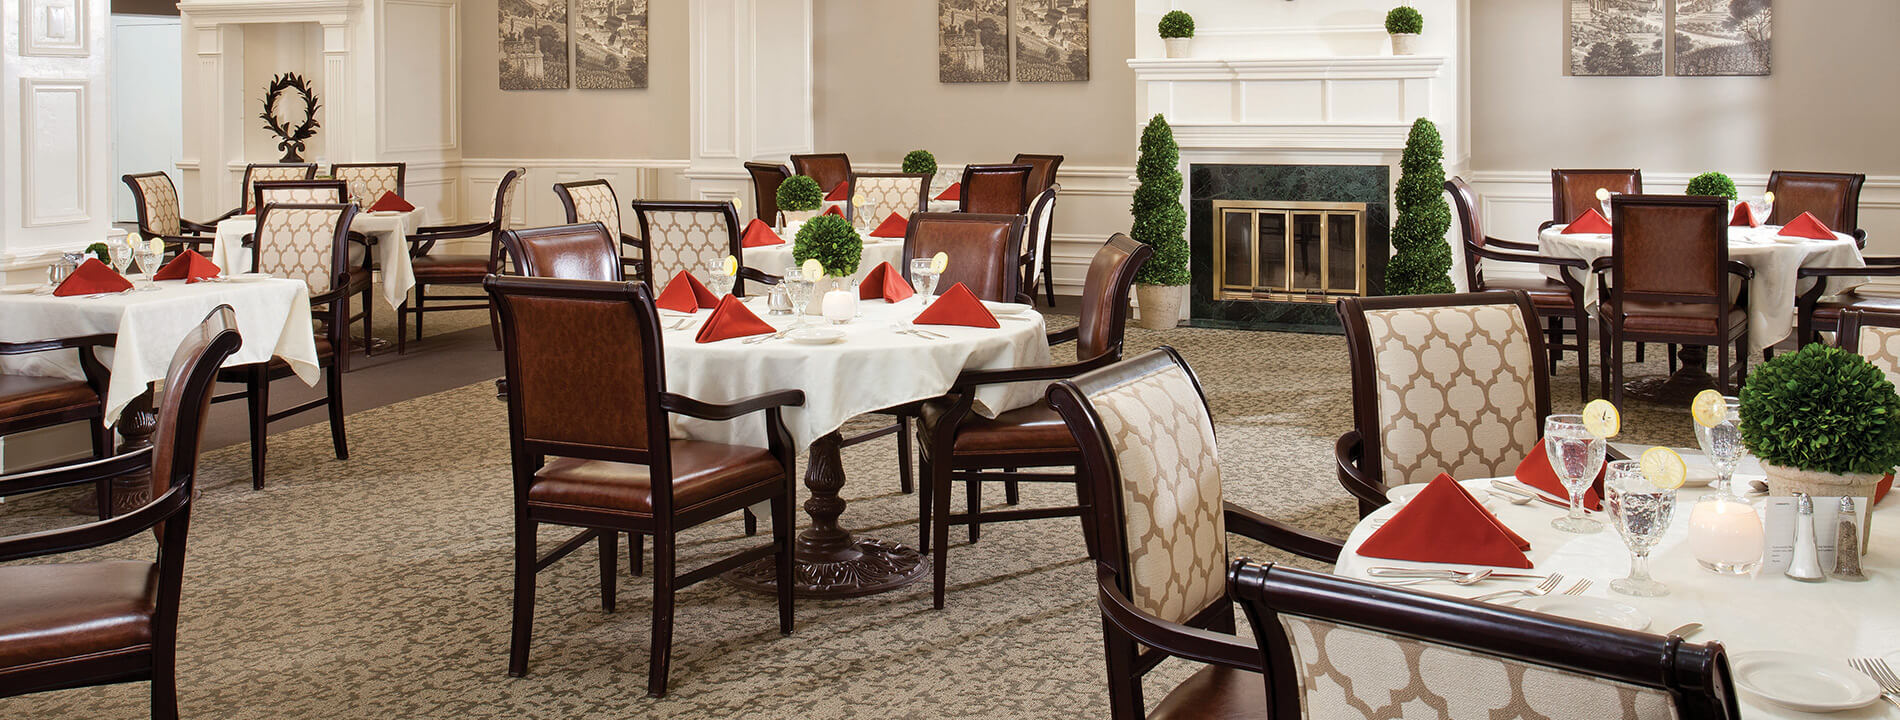 A dining area at St. Andrews Village.